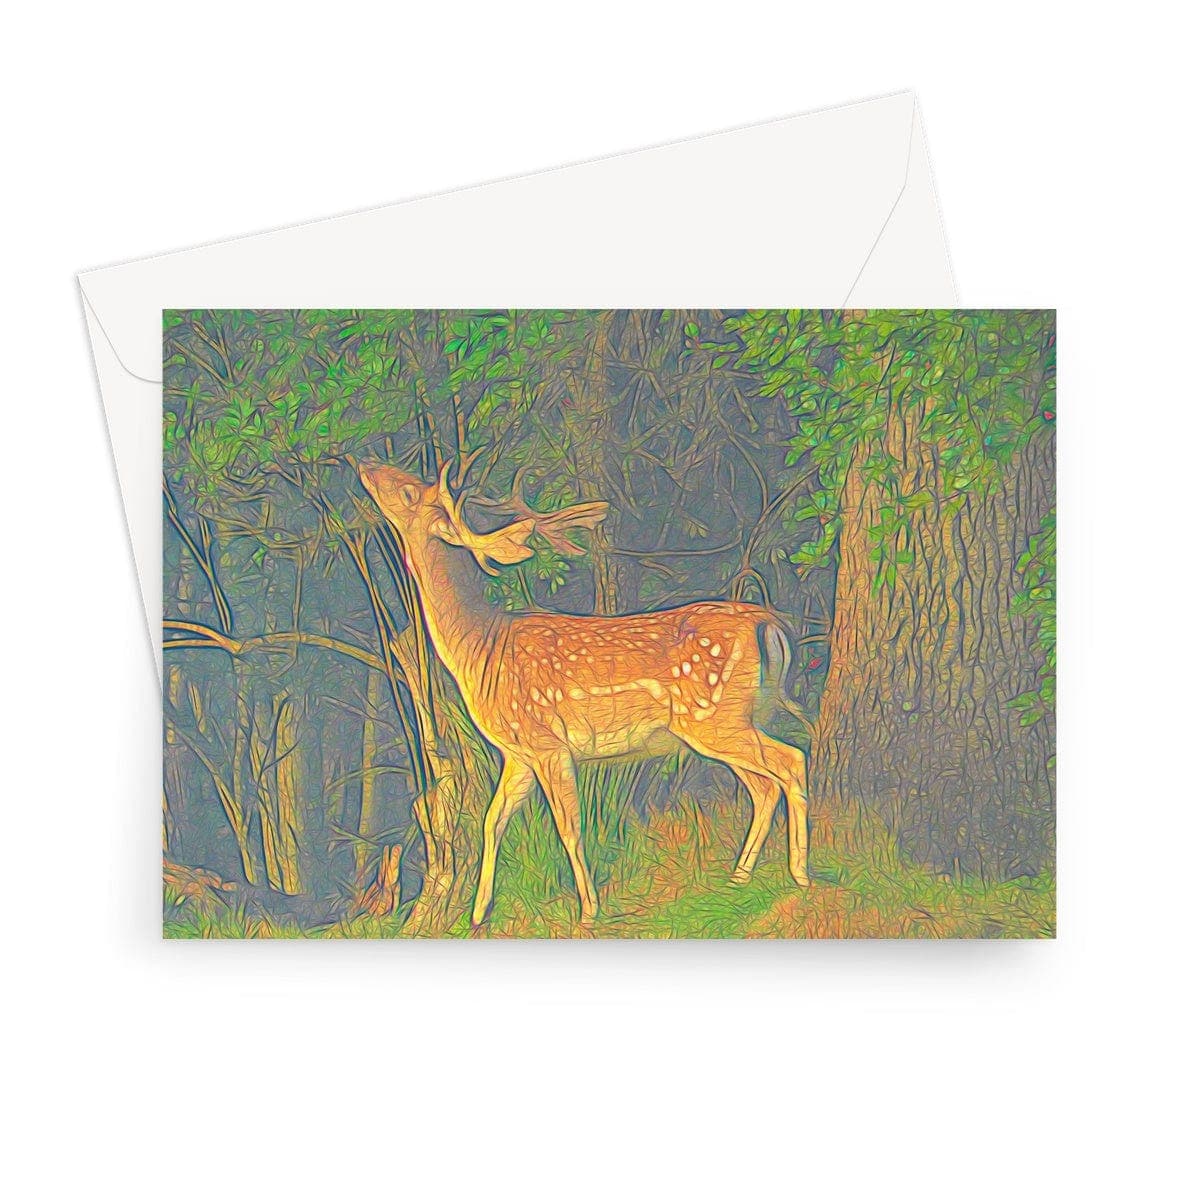 Young deer, Greeting Card